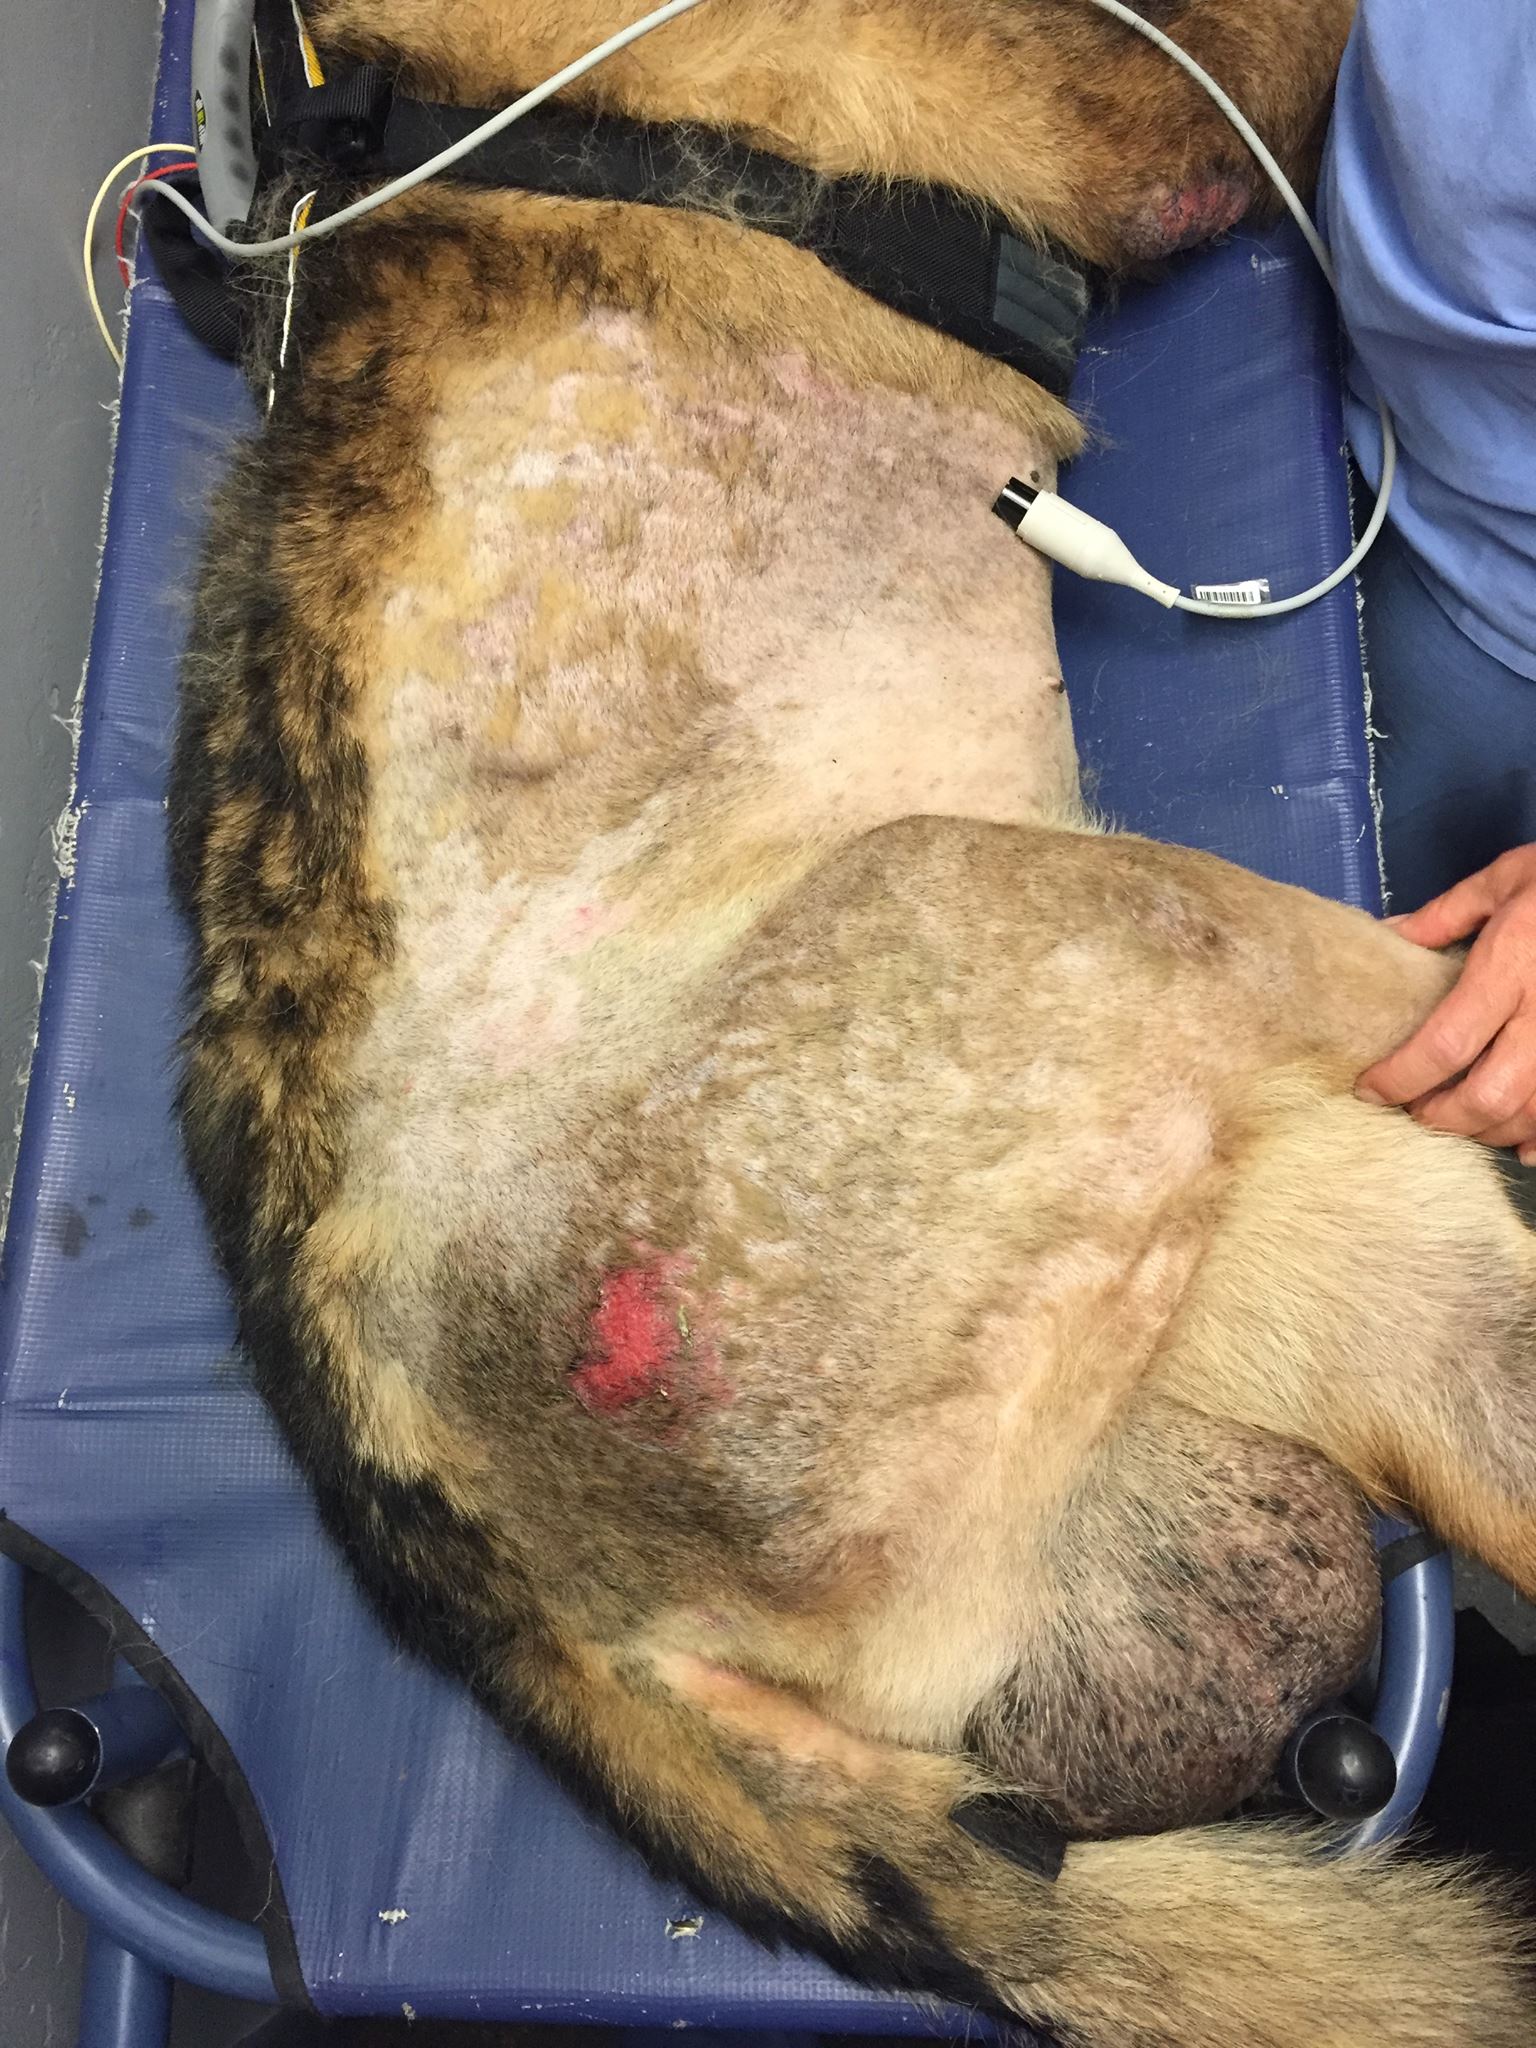 German Shepherd after stay at CV before surgery